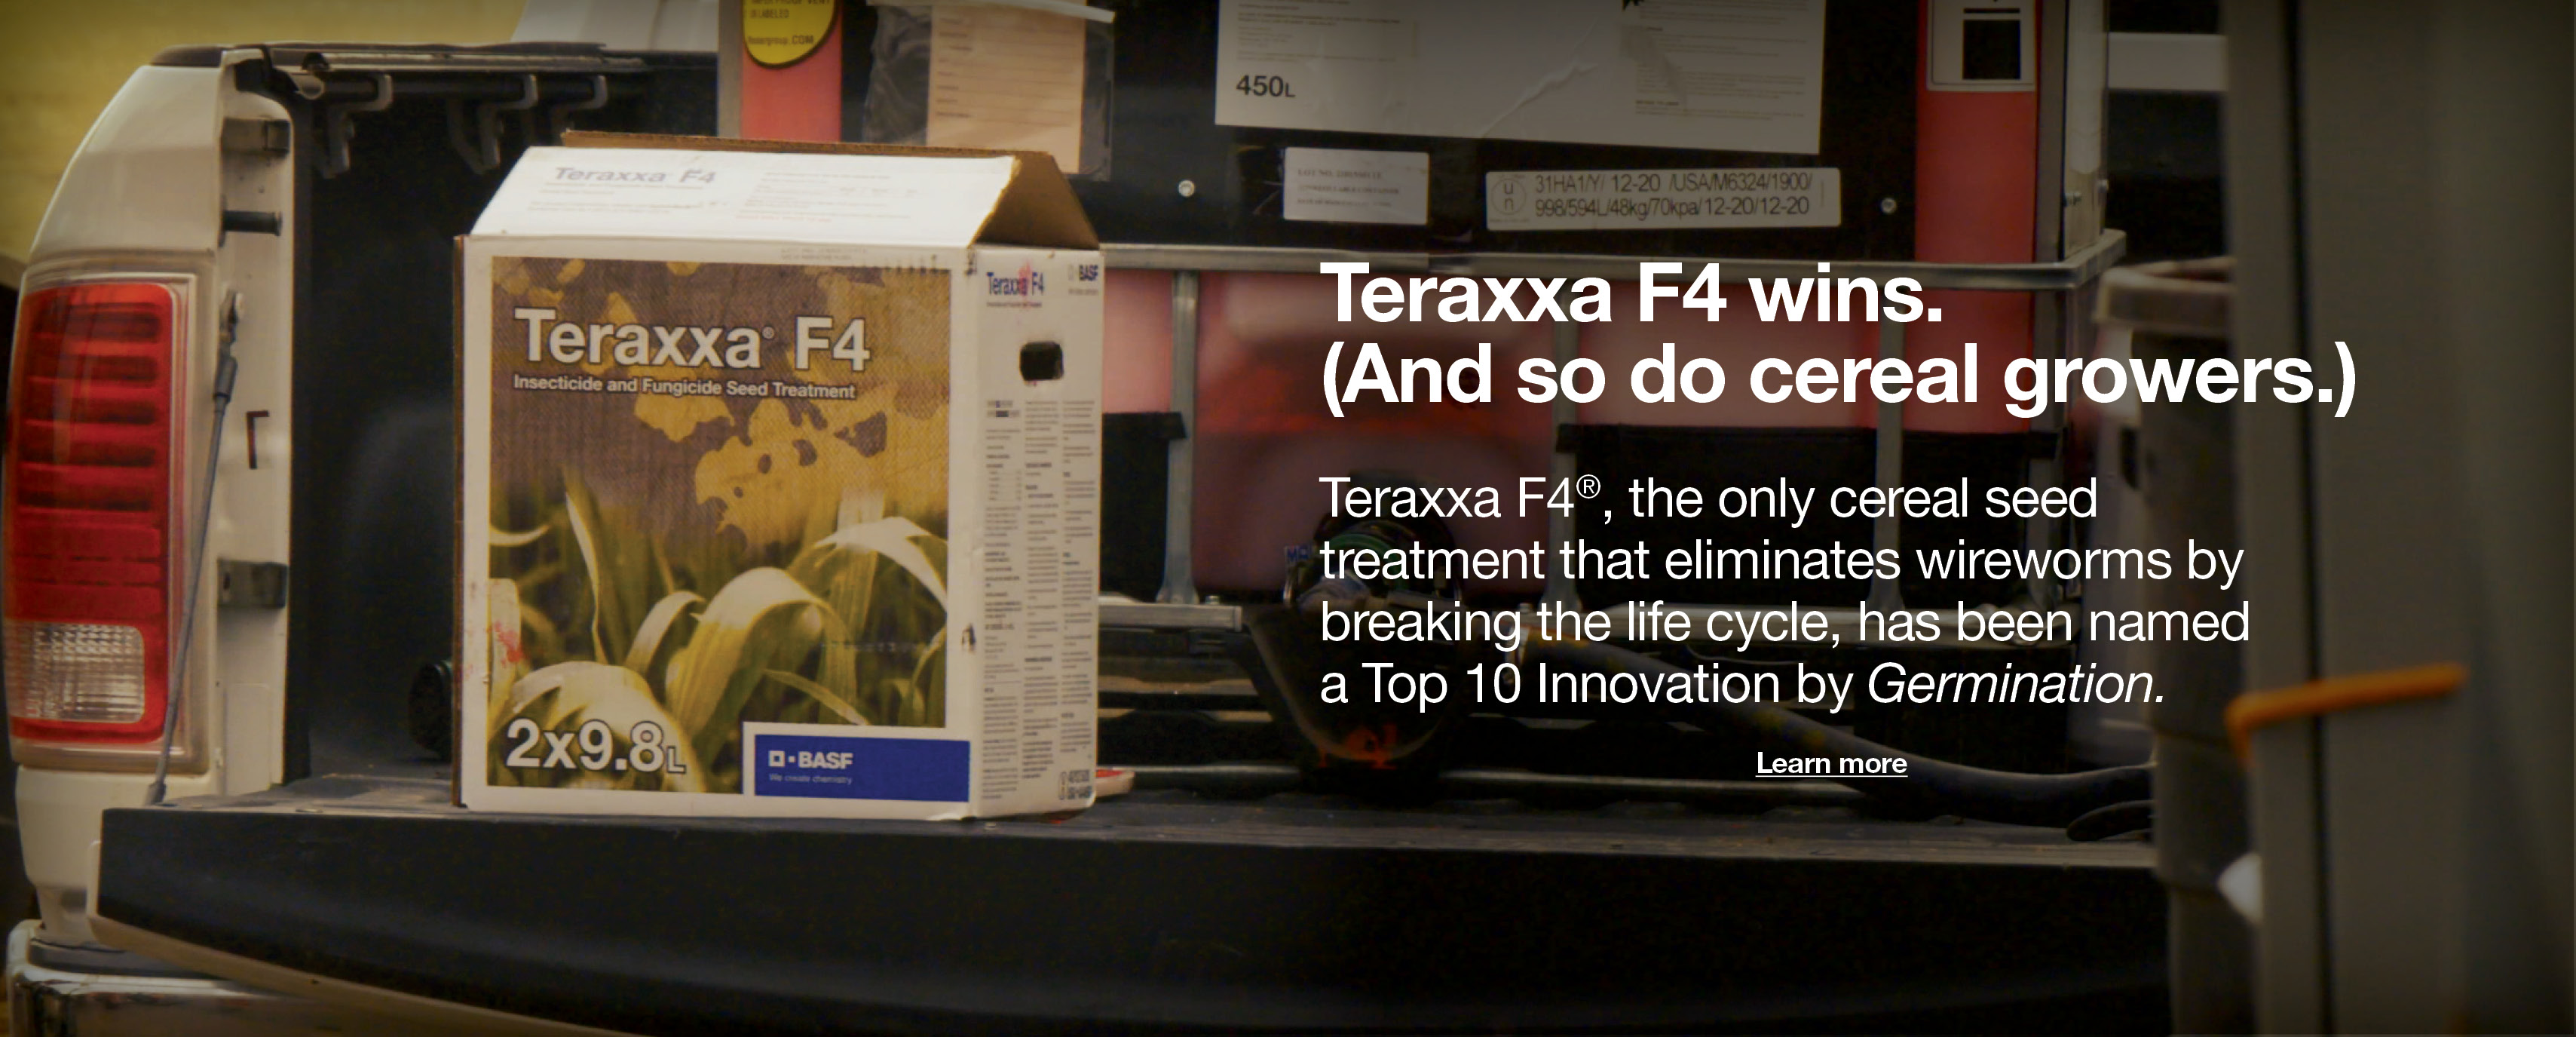 Teraxxa F4 wins .(And so do cereal growers.)